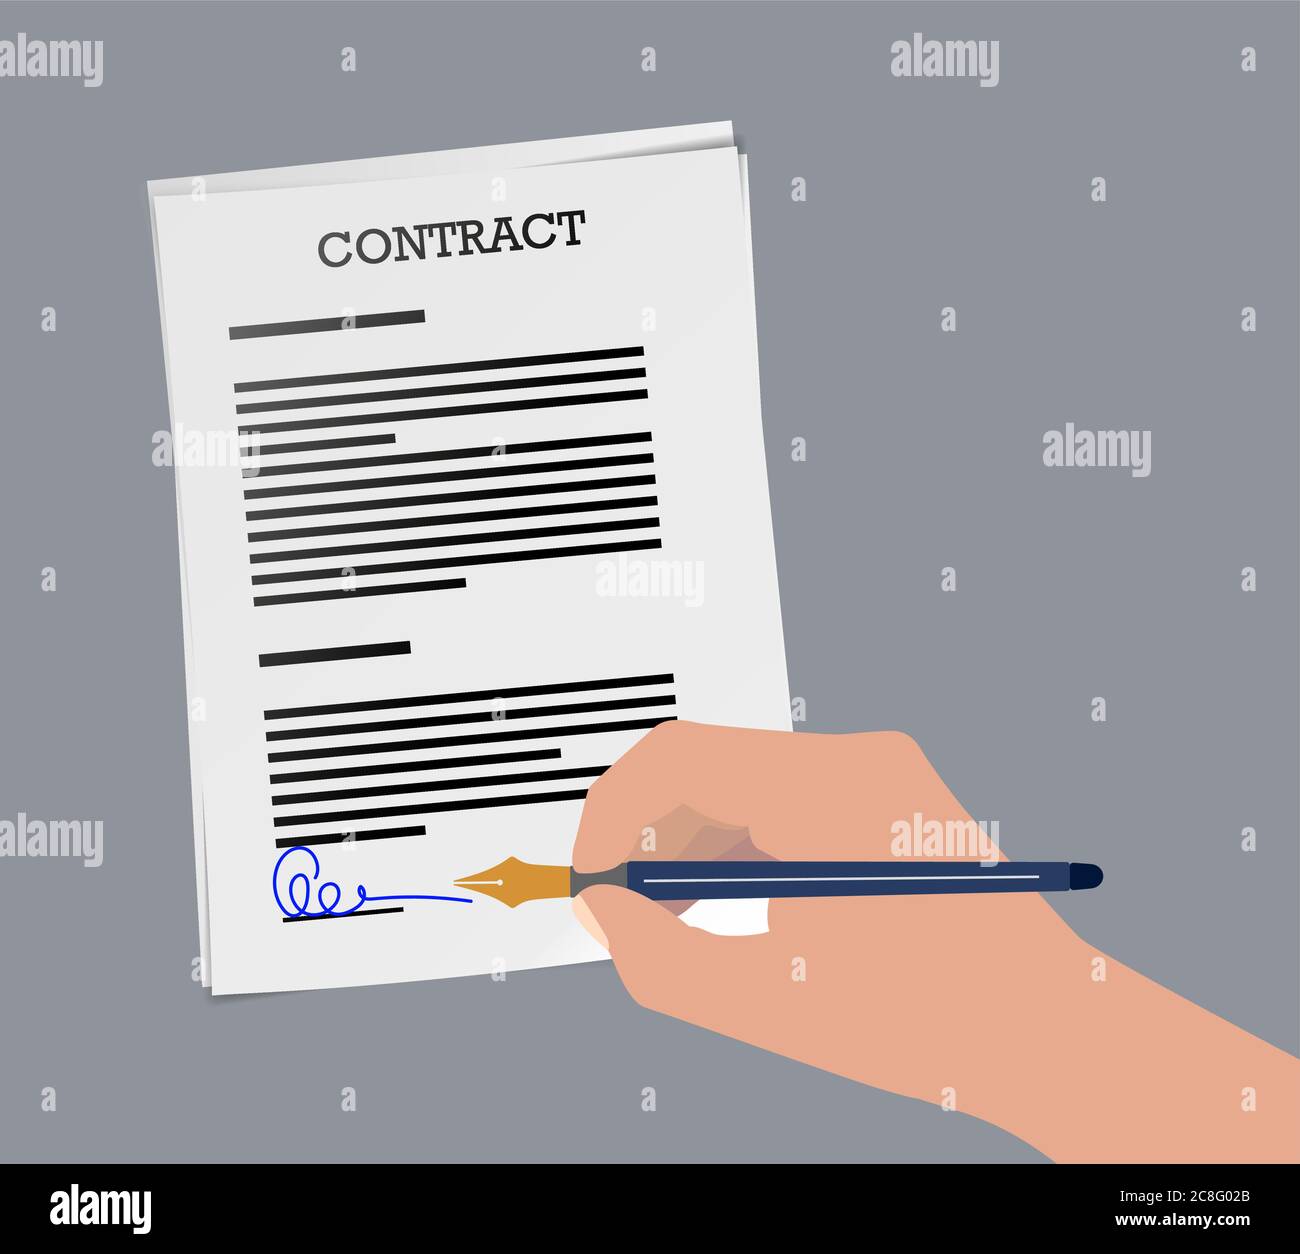 vector illustration of person signing contract with fountain pen Stock Vector